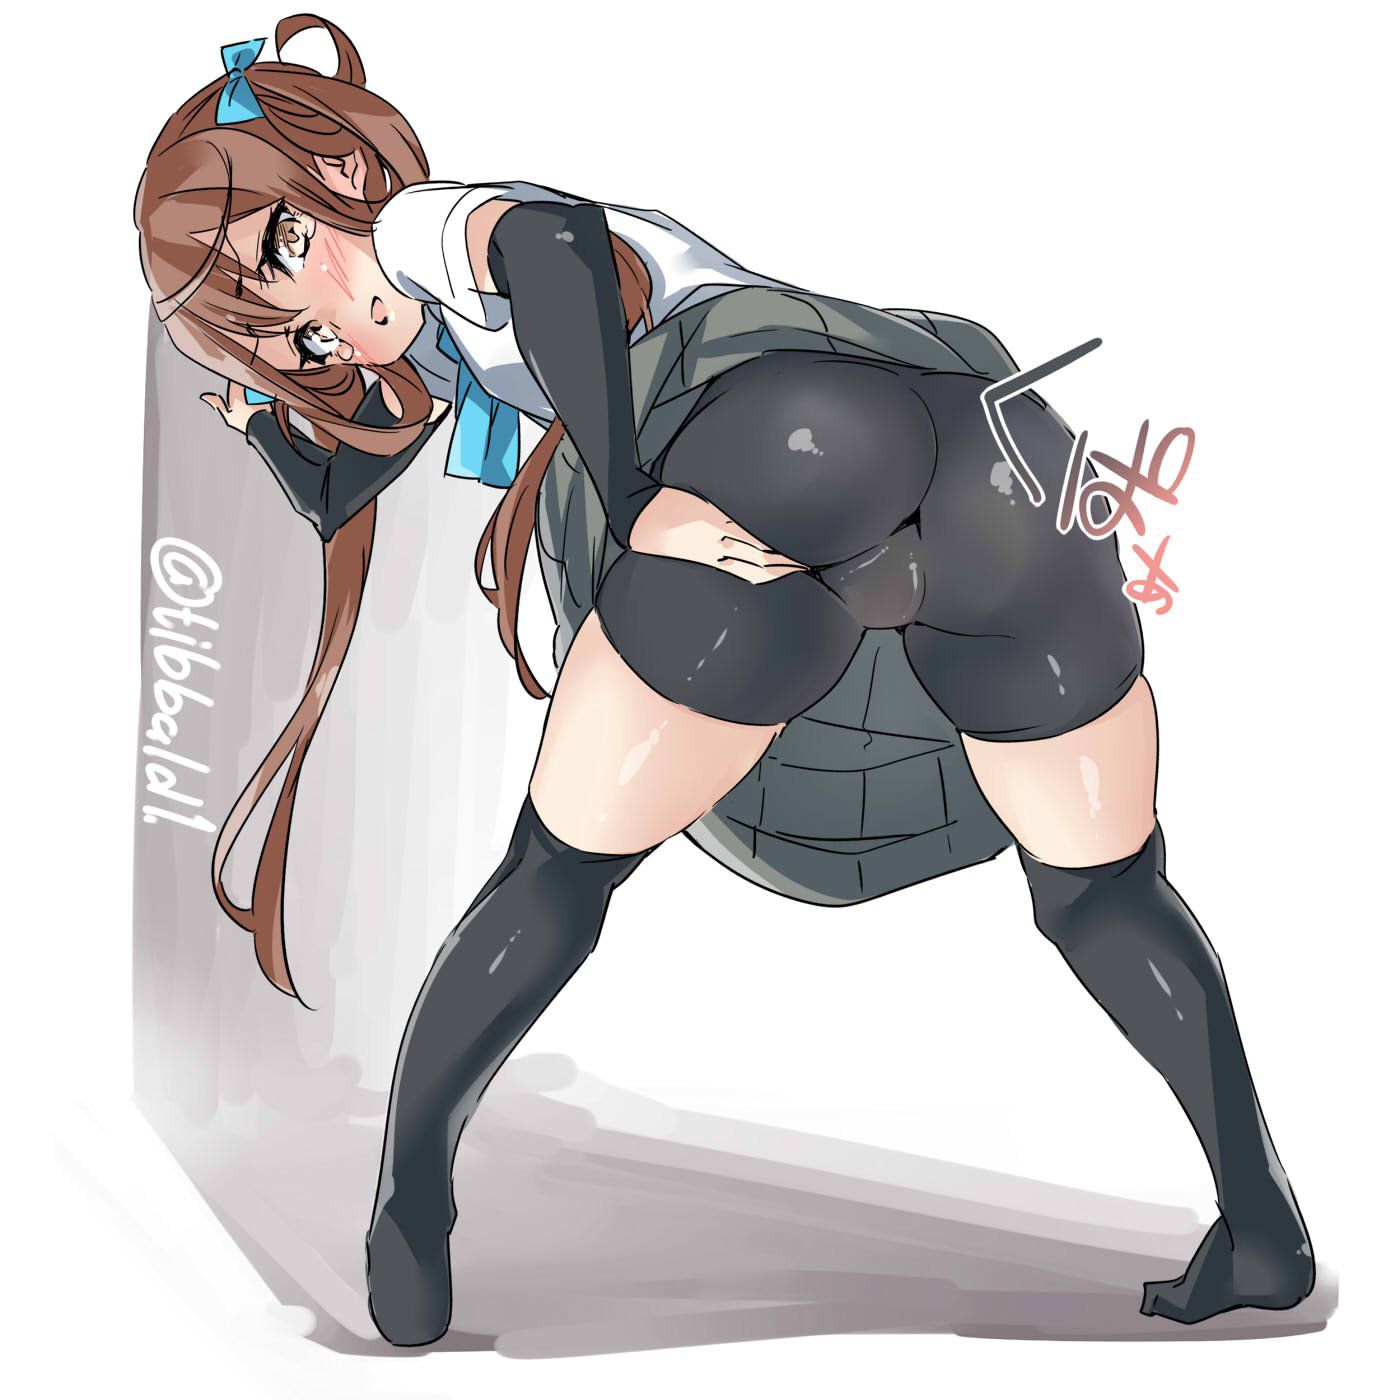 [Secondary] The second erotic image of a girl that spats is in close contact with the pitChile in the lower body of the 17 [spats] 31